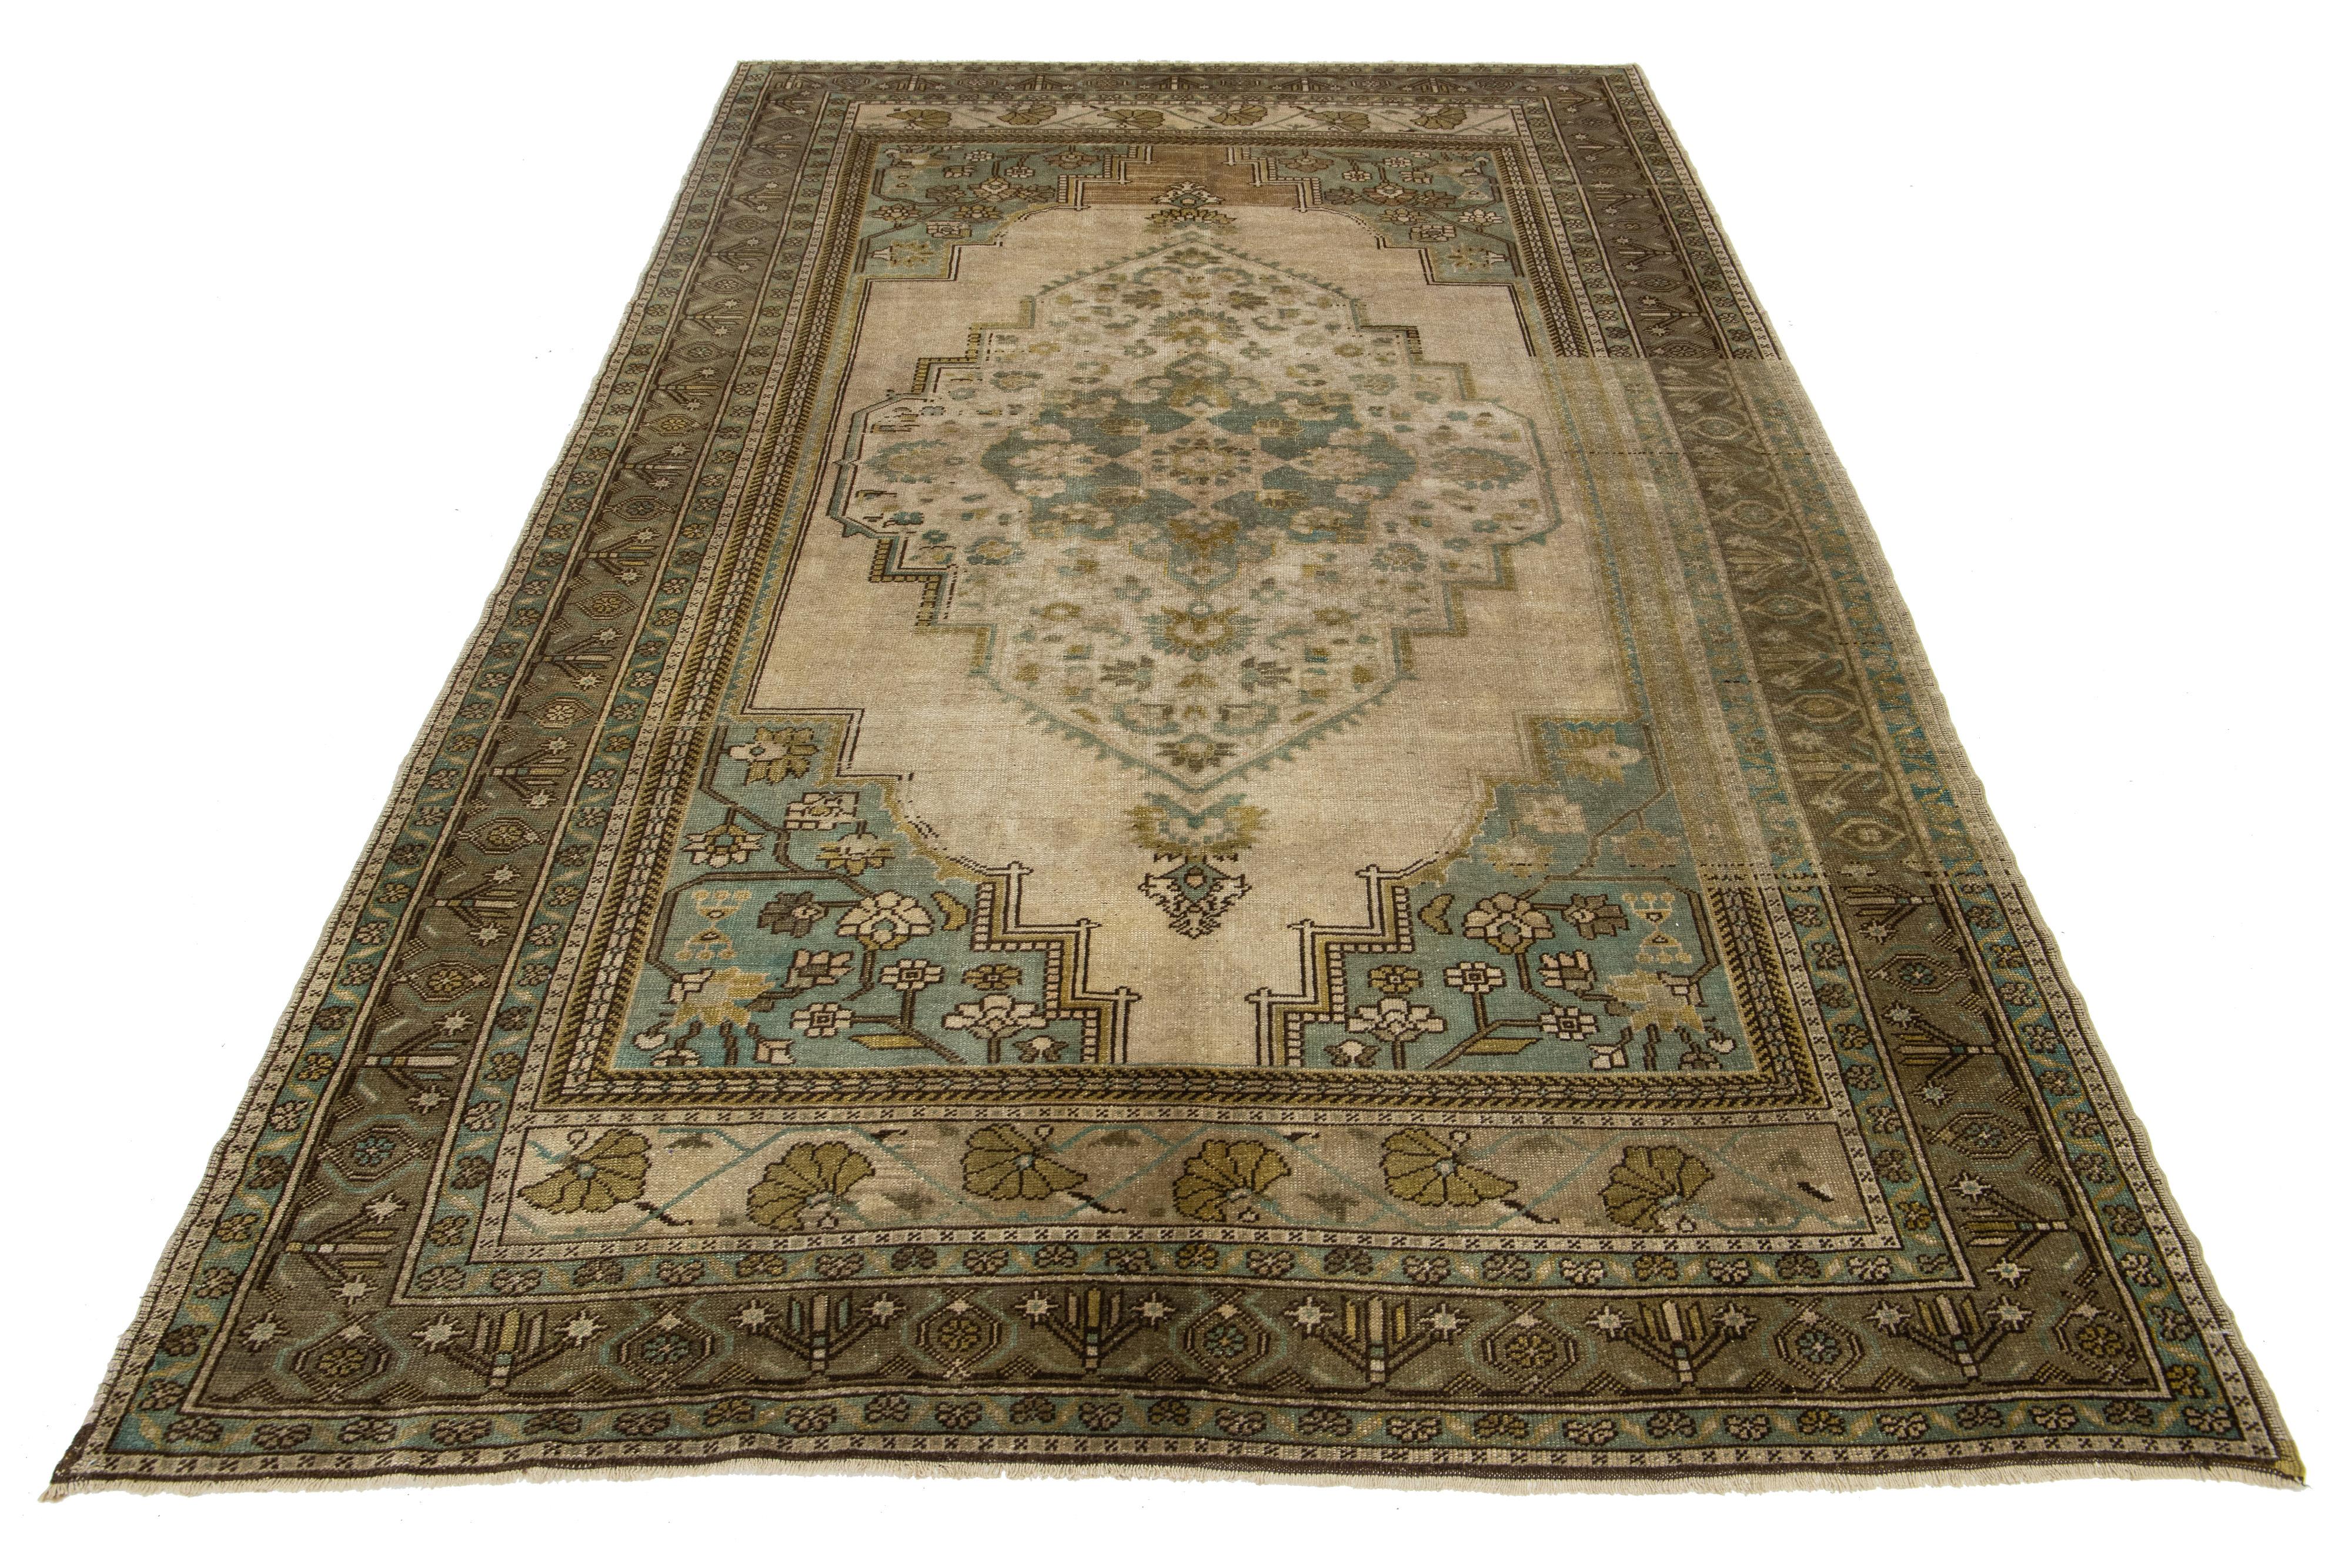 Beautiful Antique Turkish Khotan hand-knotted wool rug with a light brown color field. This Khotan has multicolor accents in a gorgeous all-over medallion floral motif.

This runner measures 6'4